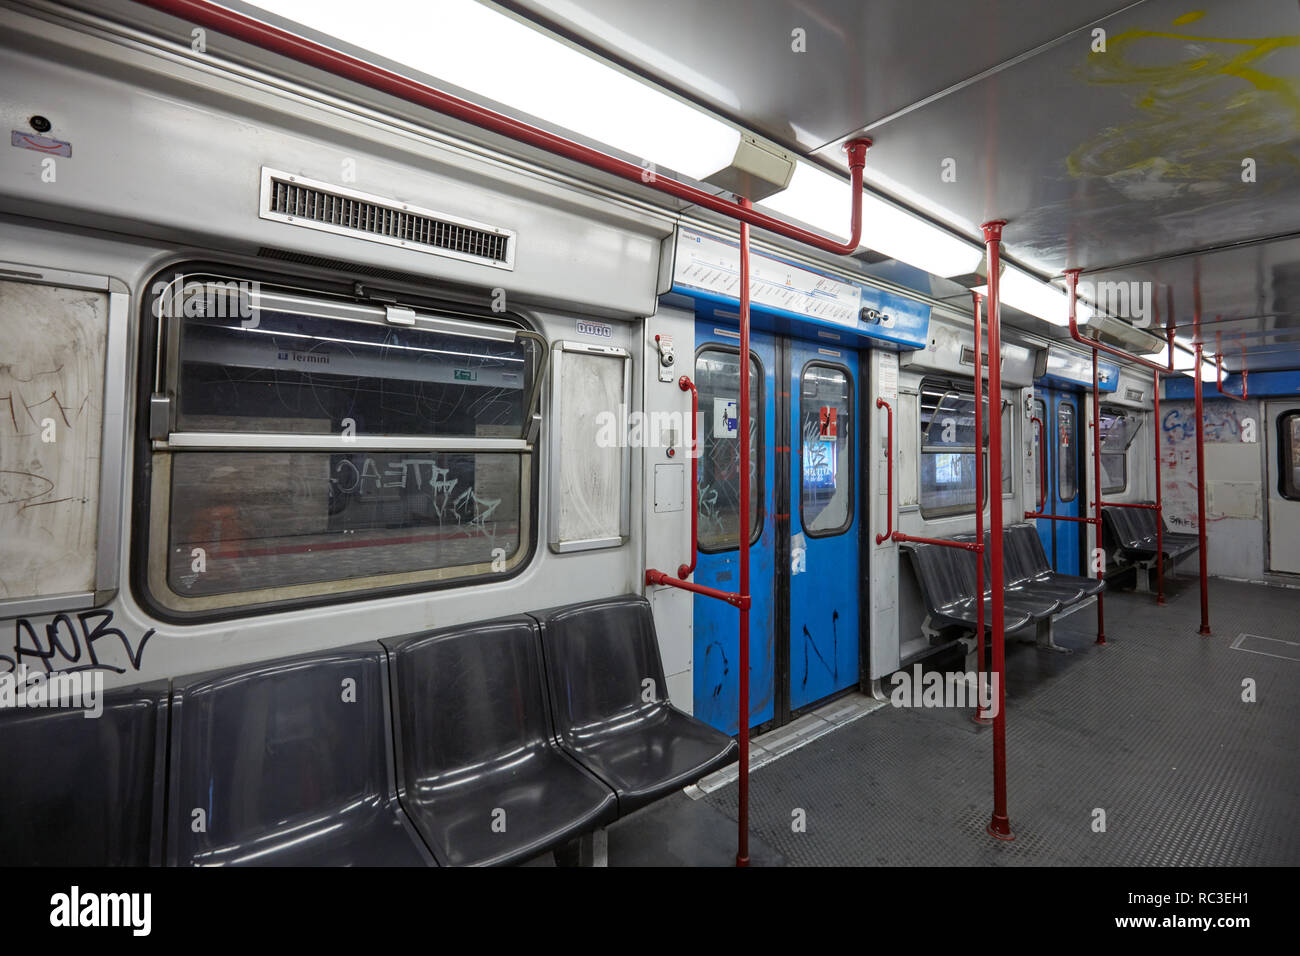 Rome, Italy - August 15, 2018: Interior of a subway train in Metro of Rome. Stock Photo